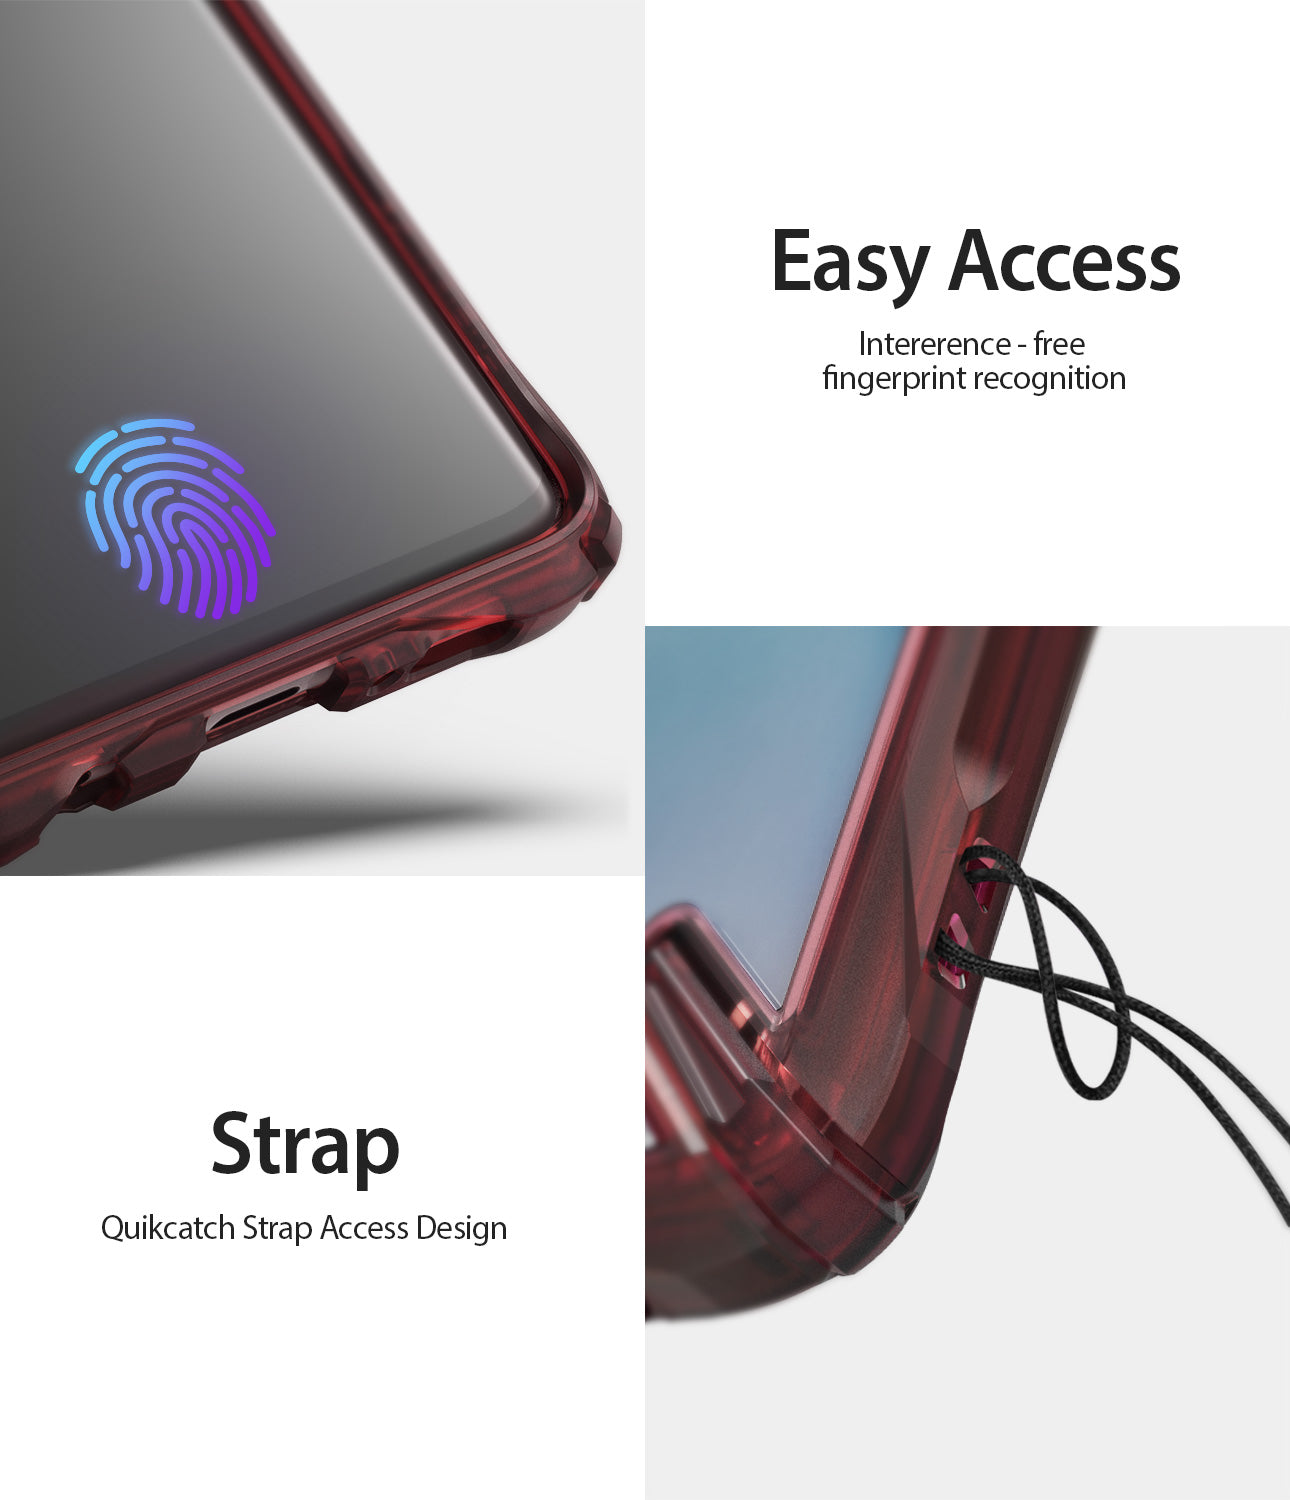 easy access interference free fingerprint recognition with quikcatch strap aceess design